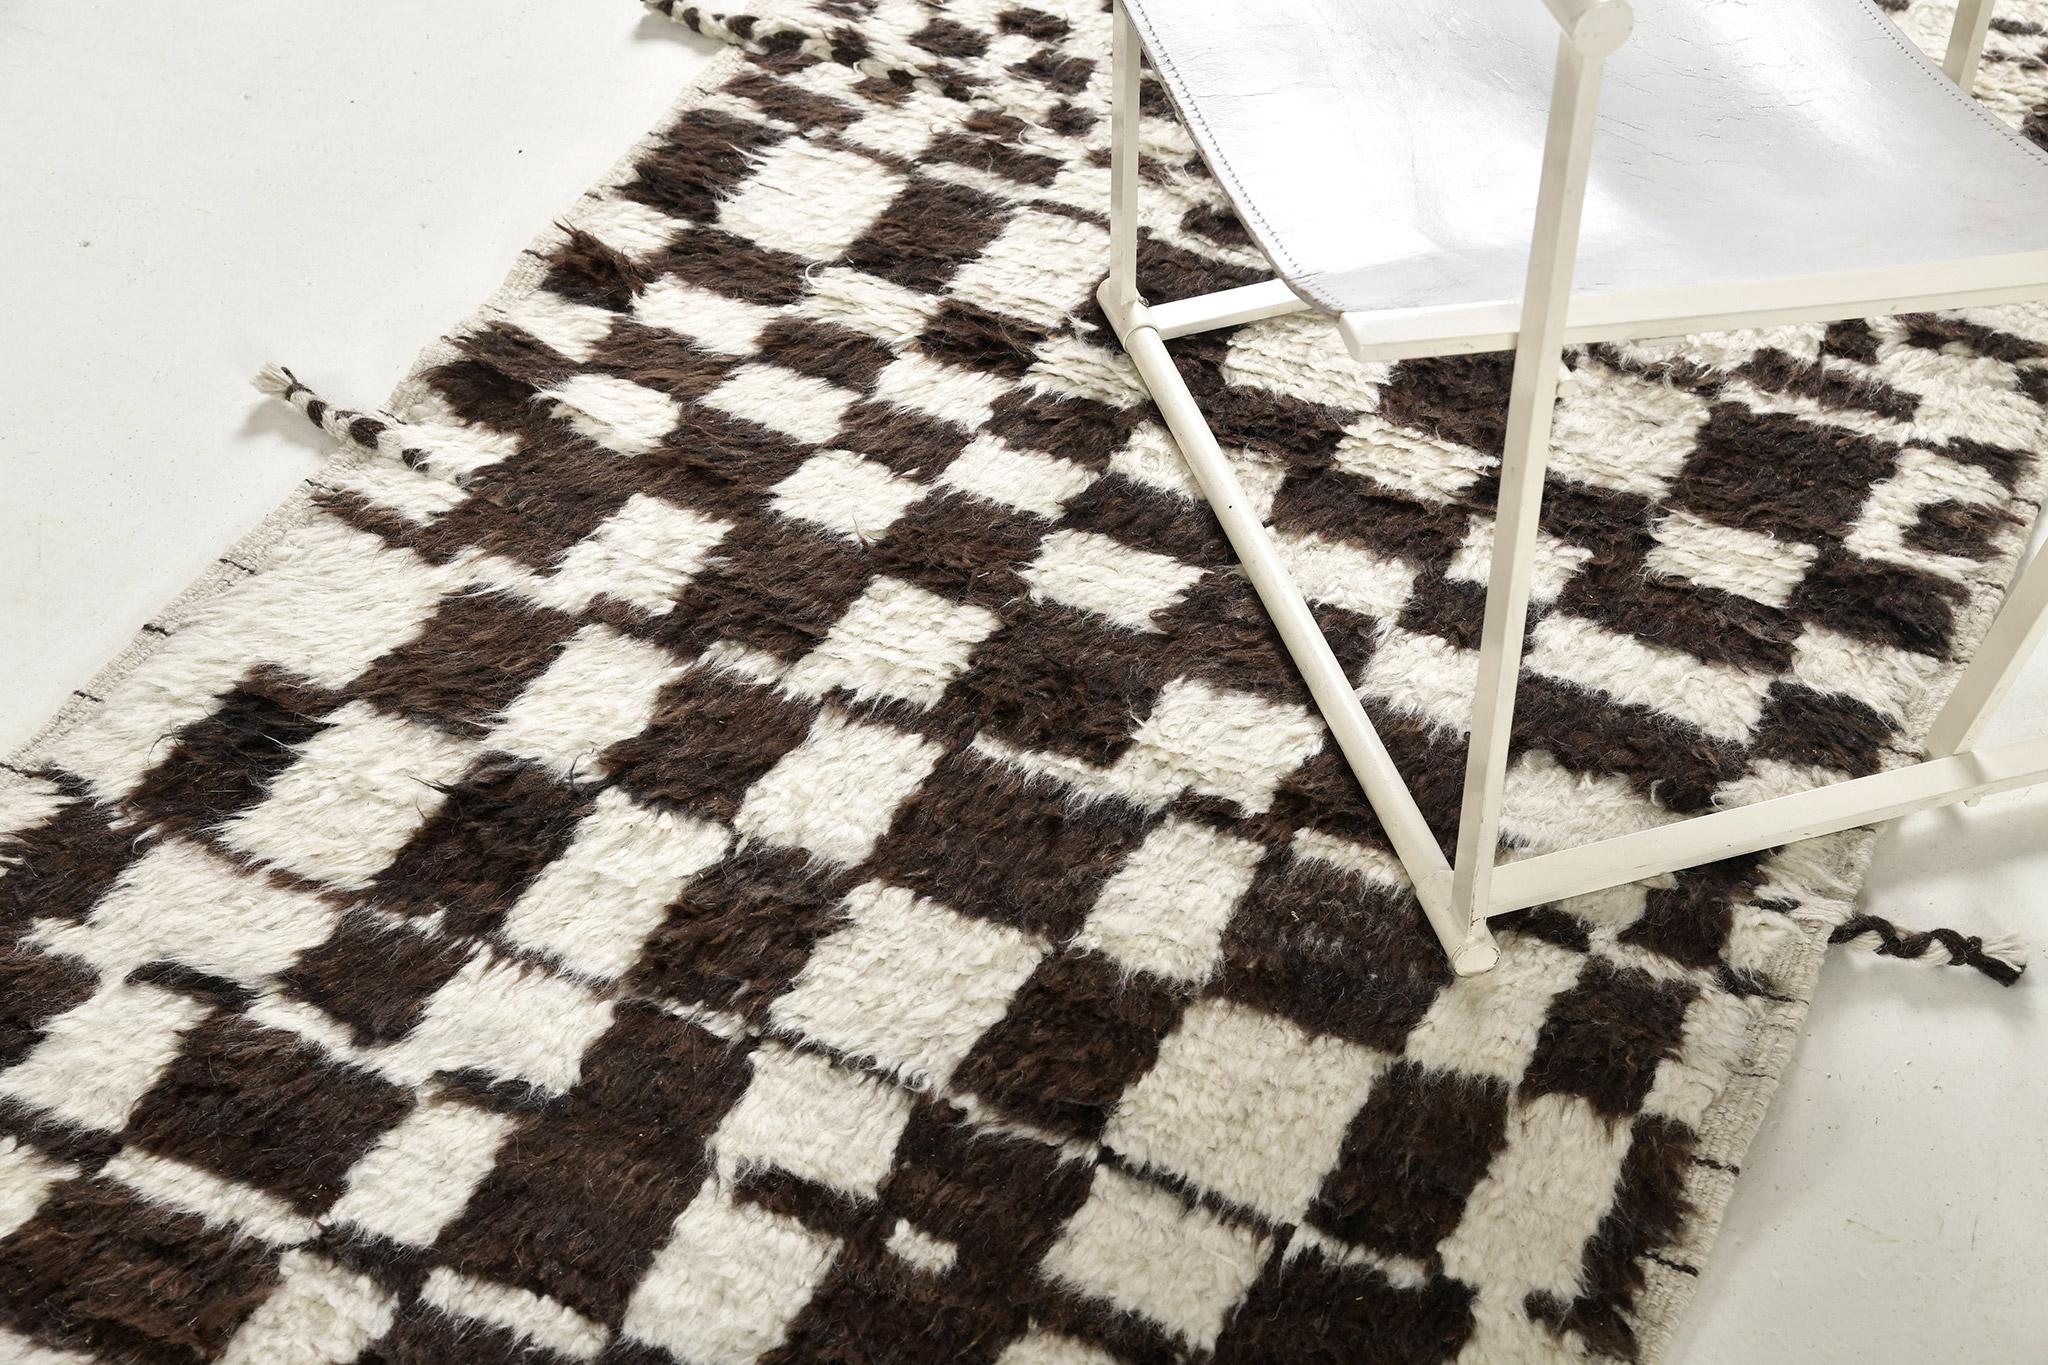 Revealing the series of uneven checkered motifs, Jugo’ is a phenomenal rug that will captivate you in every possible way. Featuring earthy neutral tones of umber brown and ivory, this rug creates an impressive pattern perfect to be placed in an